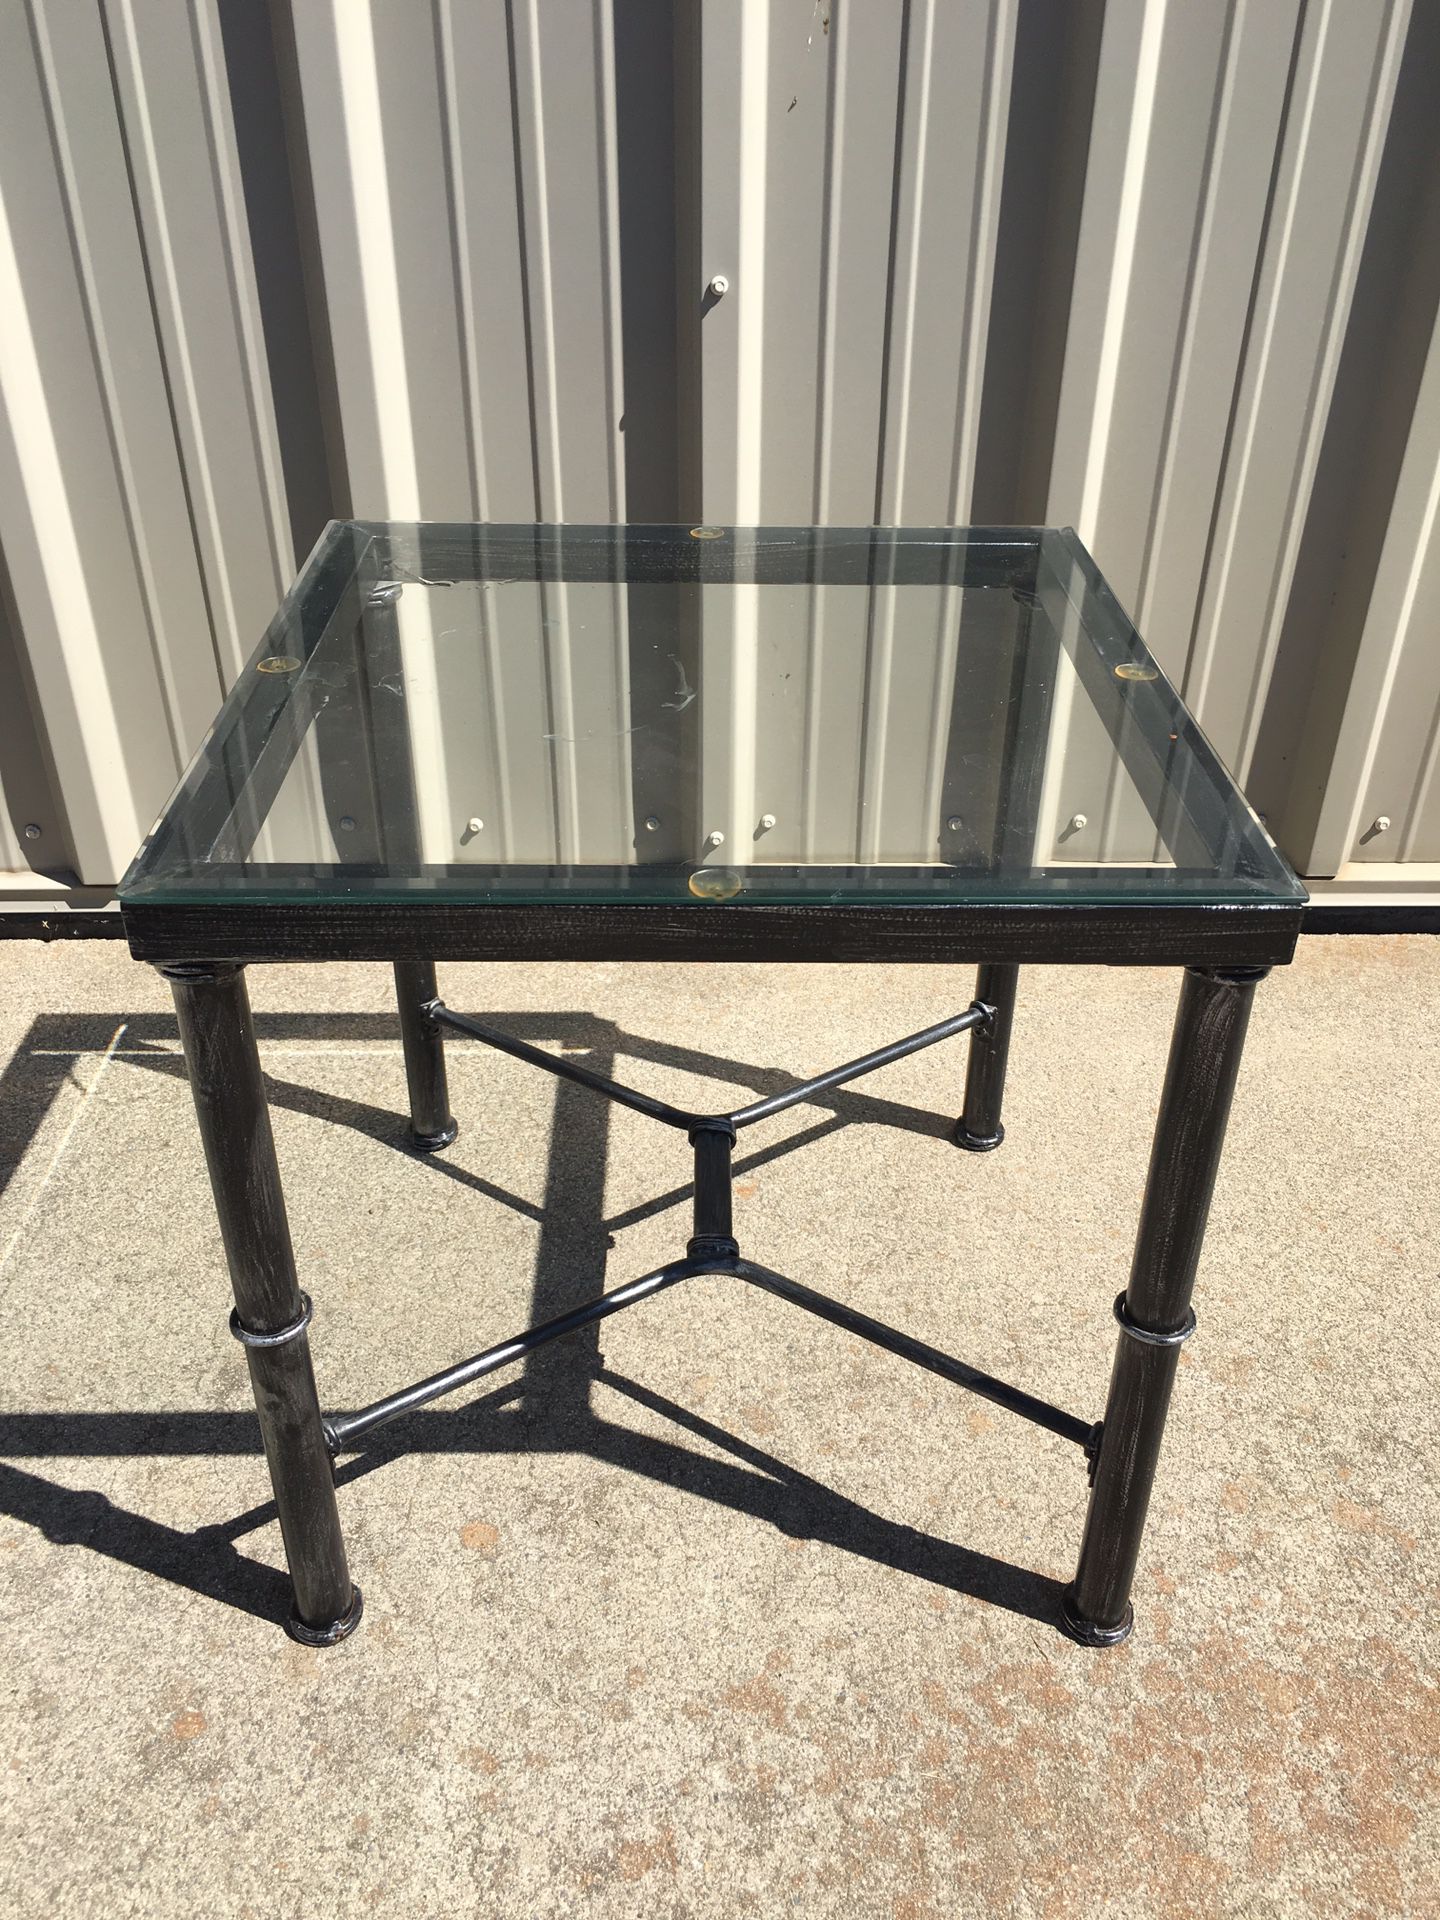 Metal side table with glass top